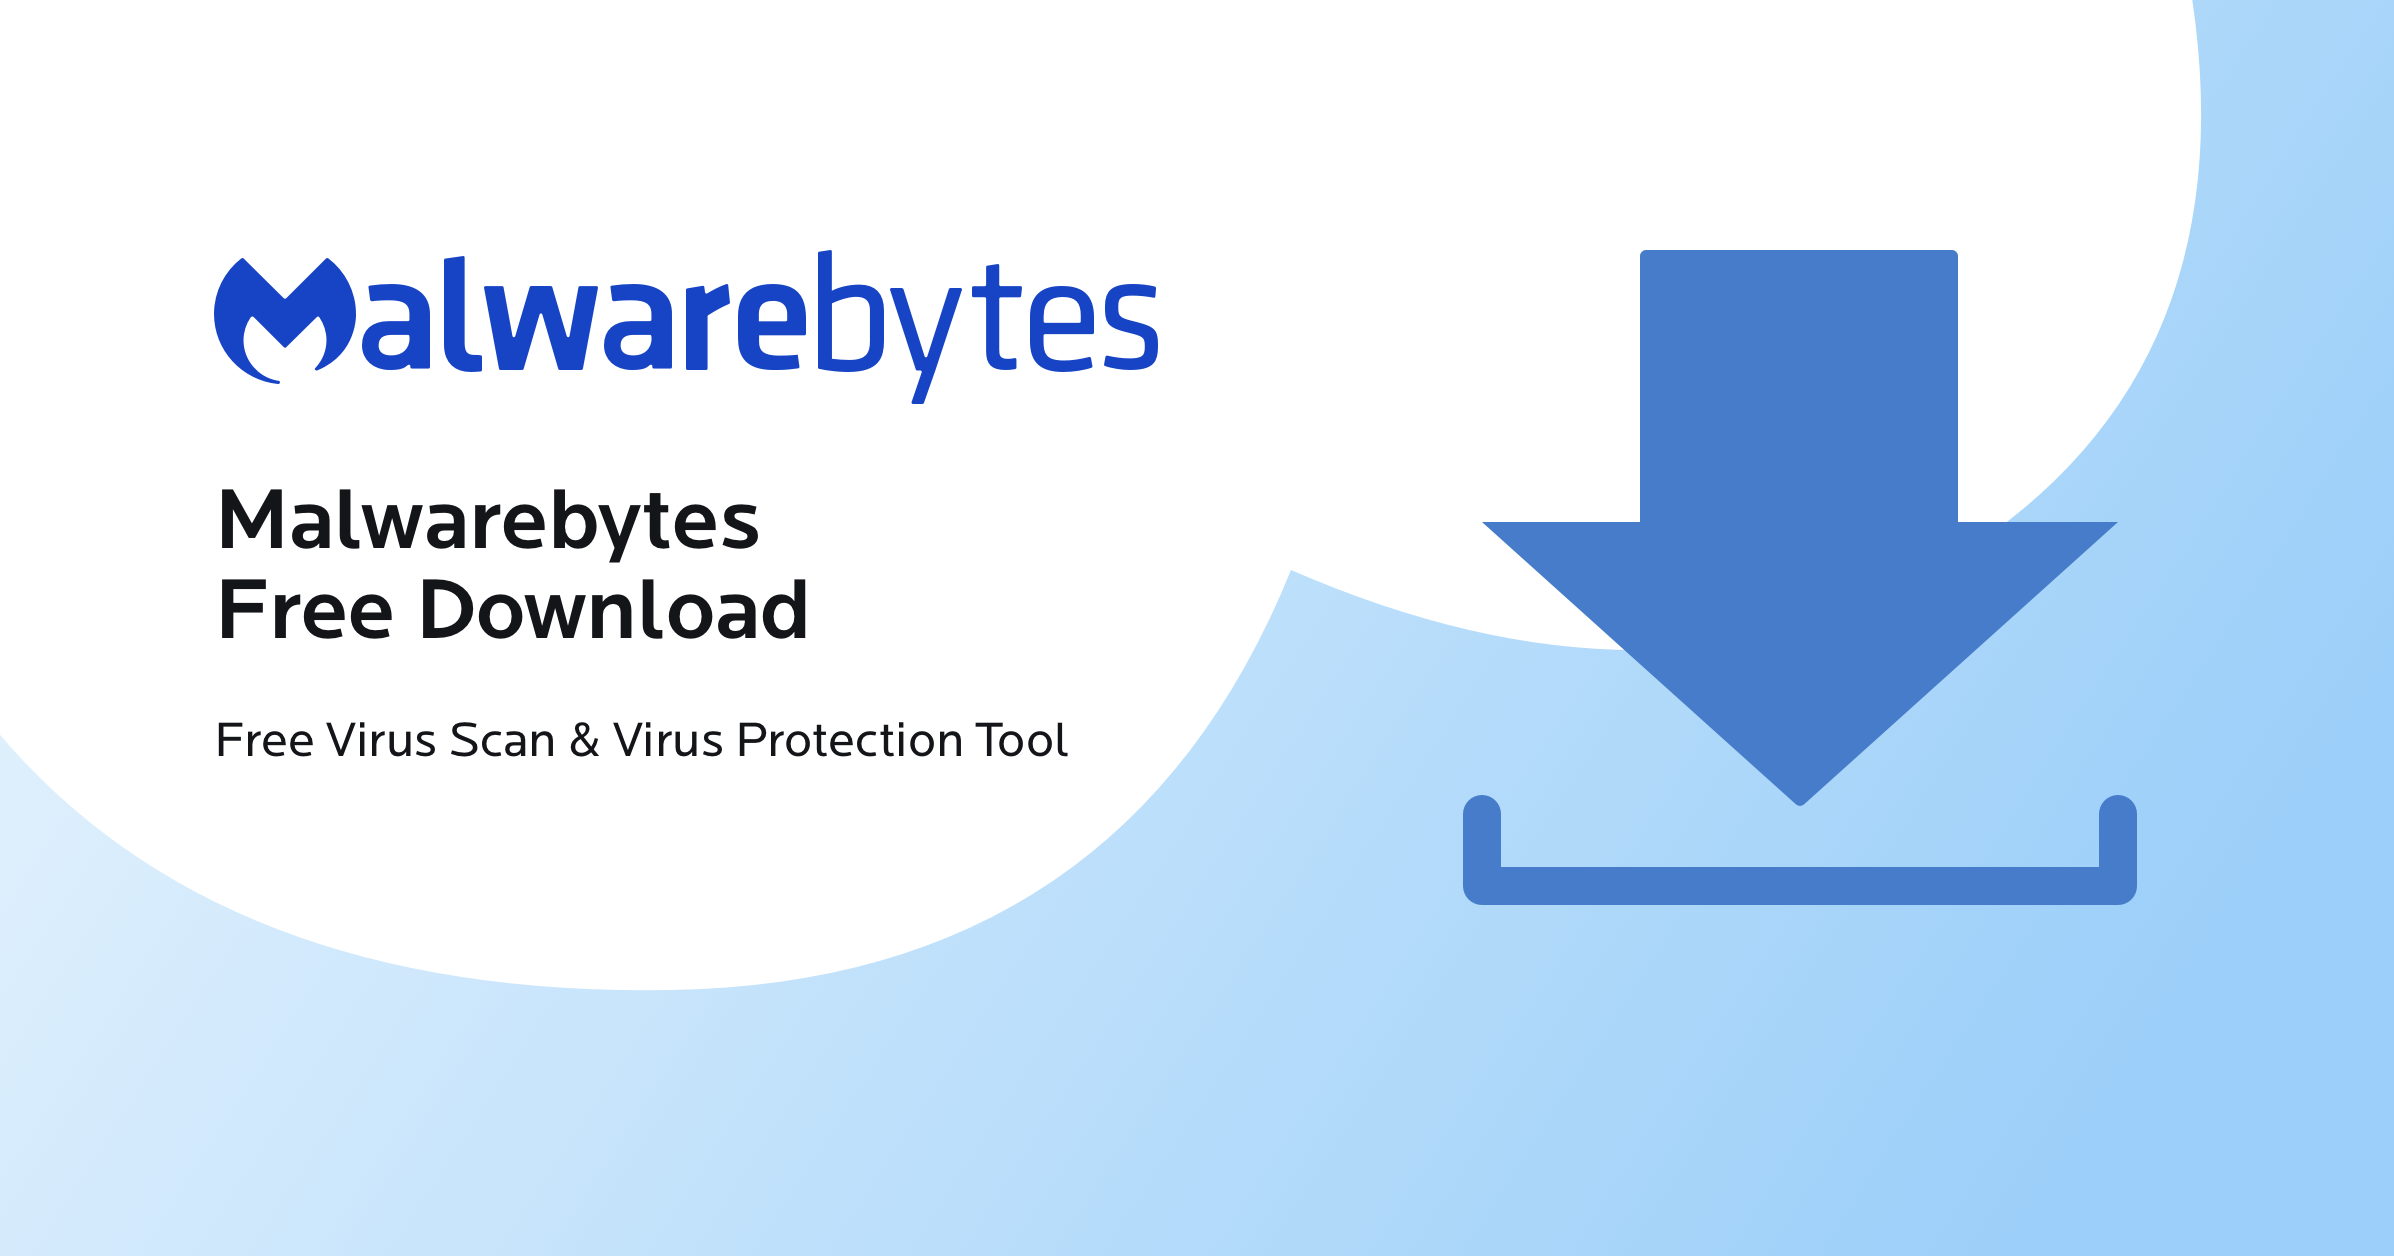 Malwarebytes Free Download: Get the essential virus scanner and antivirus software to ensure secure browsing and protect your computer from malicious threats.
Real-time Protection: Detect and block malware in real-time, preventing any potential damage to your system and personal files.